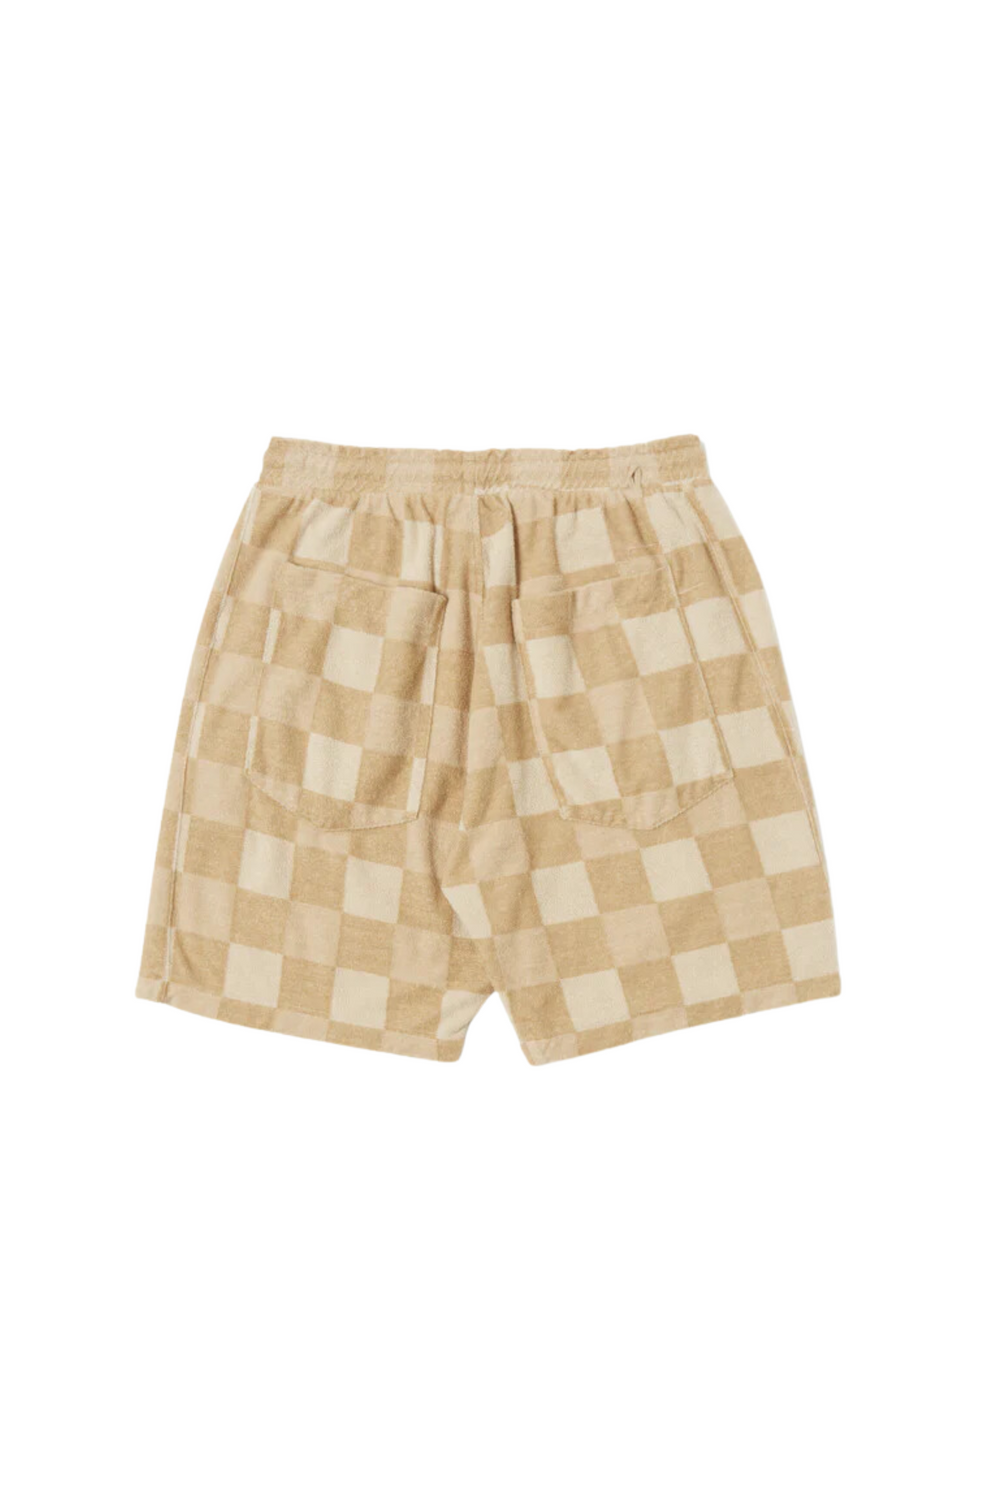 Shorts by Universal Works